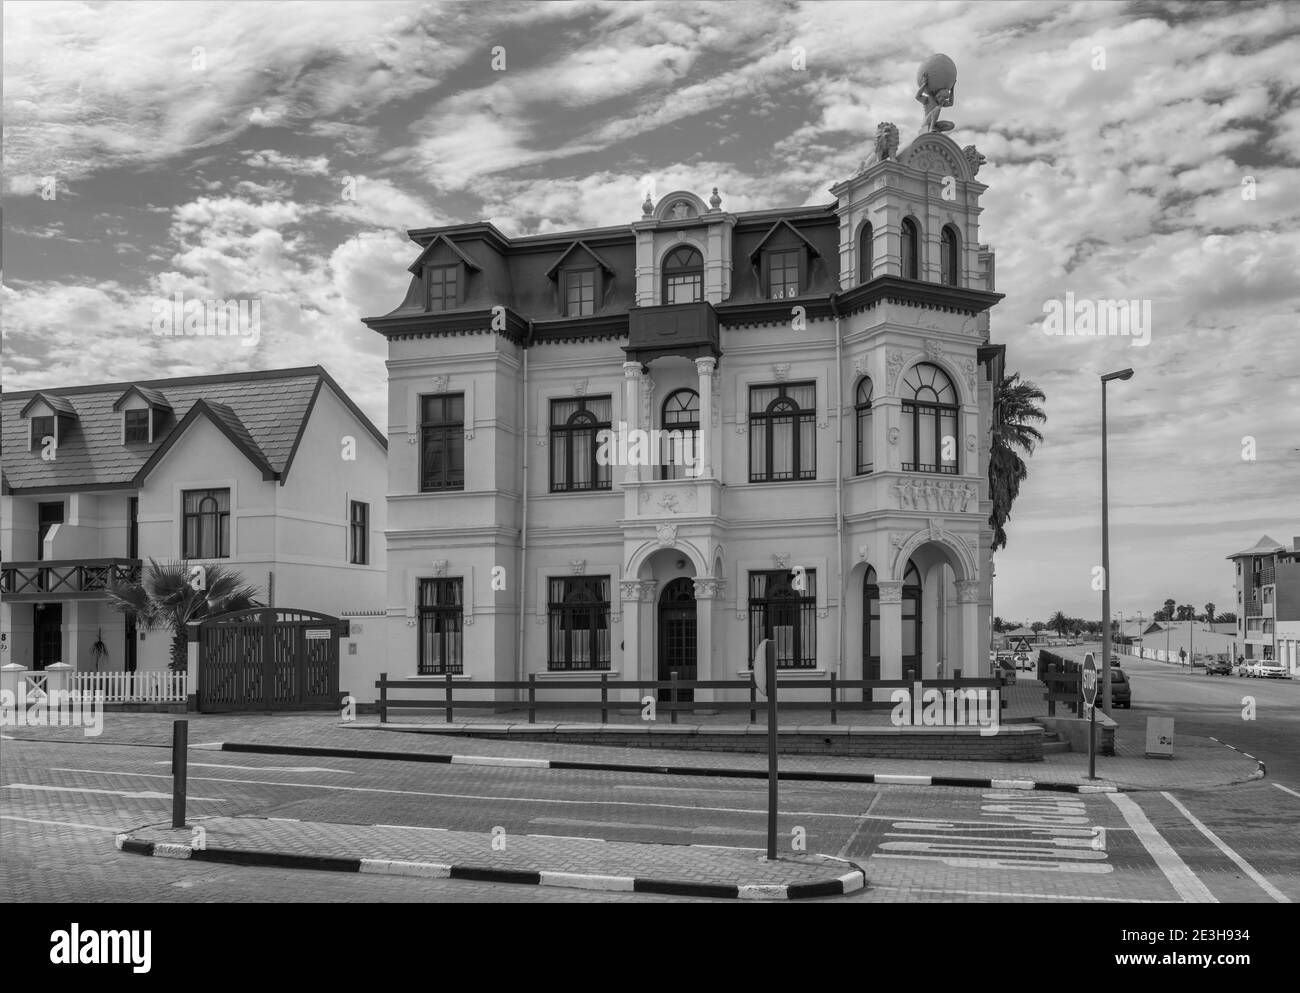 Old German colonial building in black and white, Swakopmund, Namibia Stock Photo